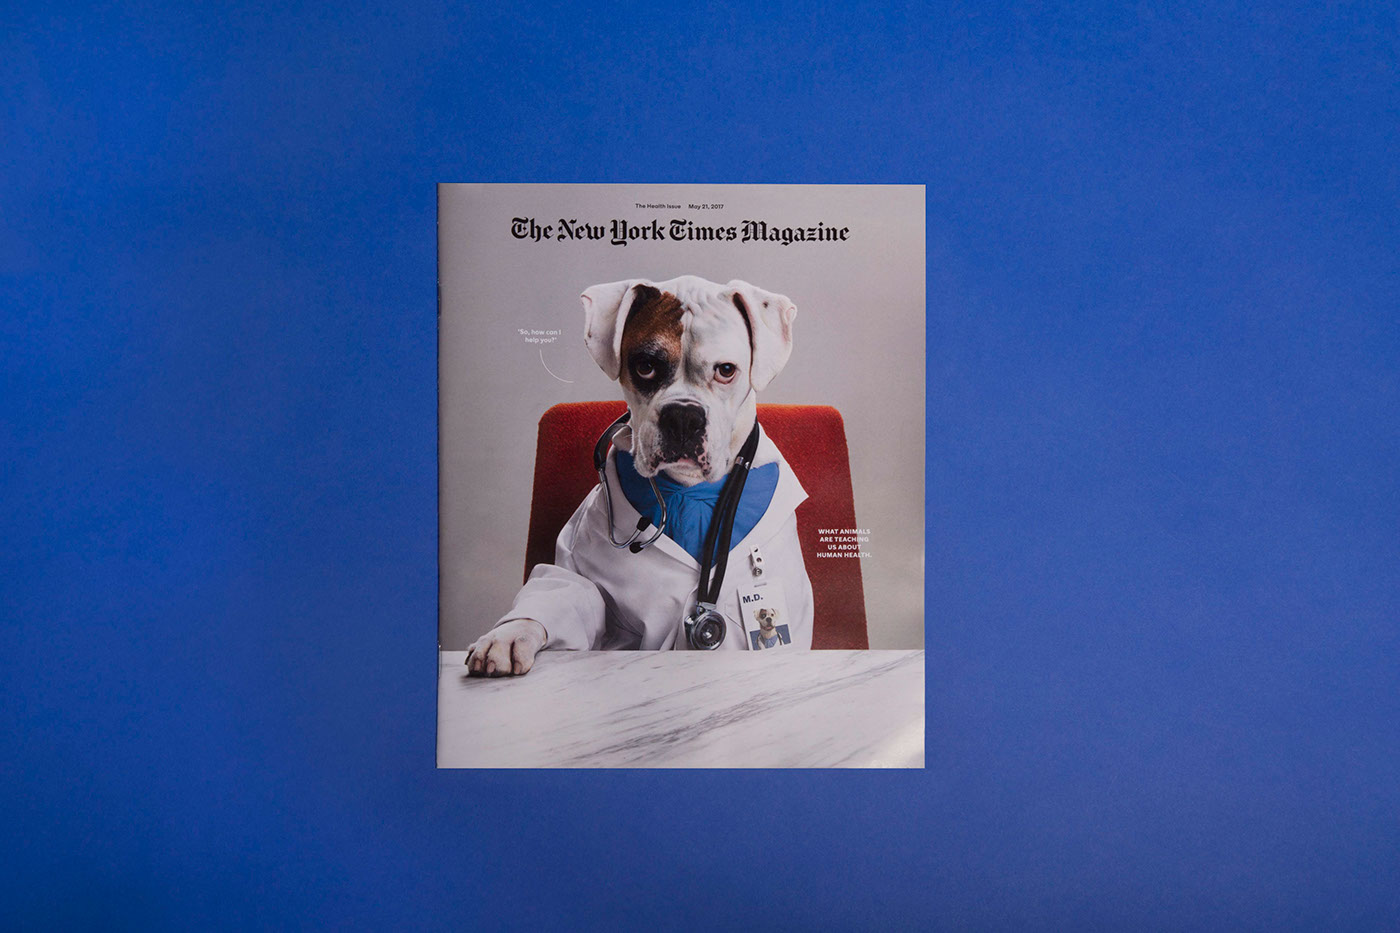 set design  Prop Styling New York Times sagmeister jessica walsh arielle casale cats dogs doctors Health